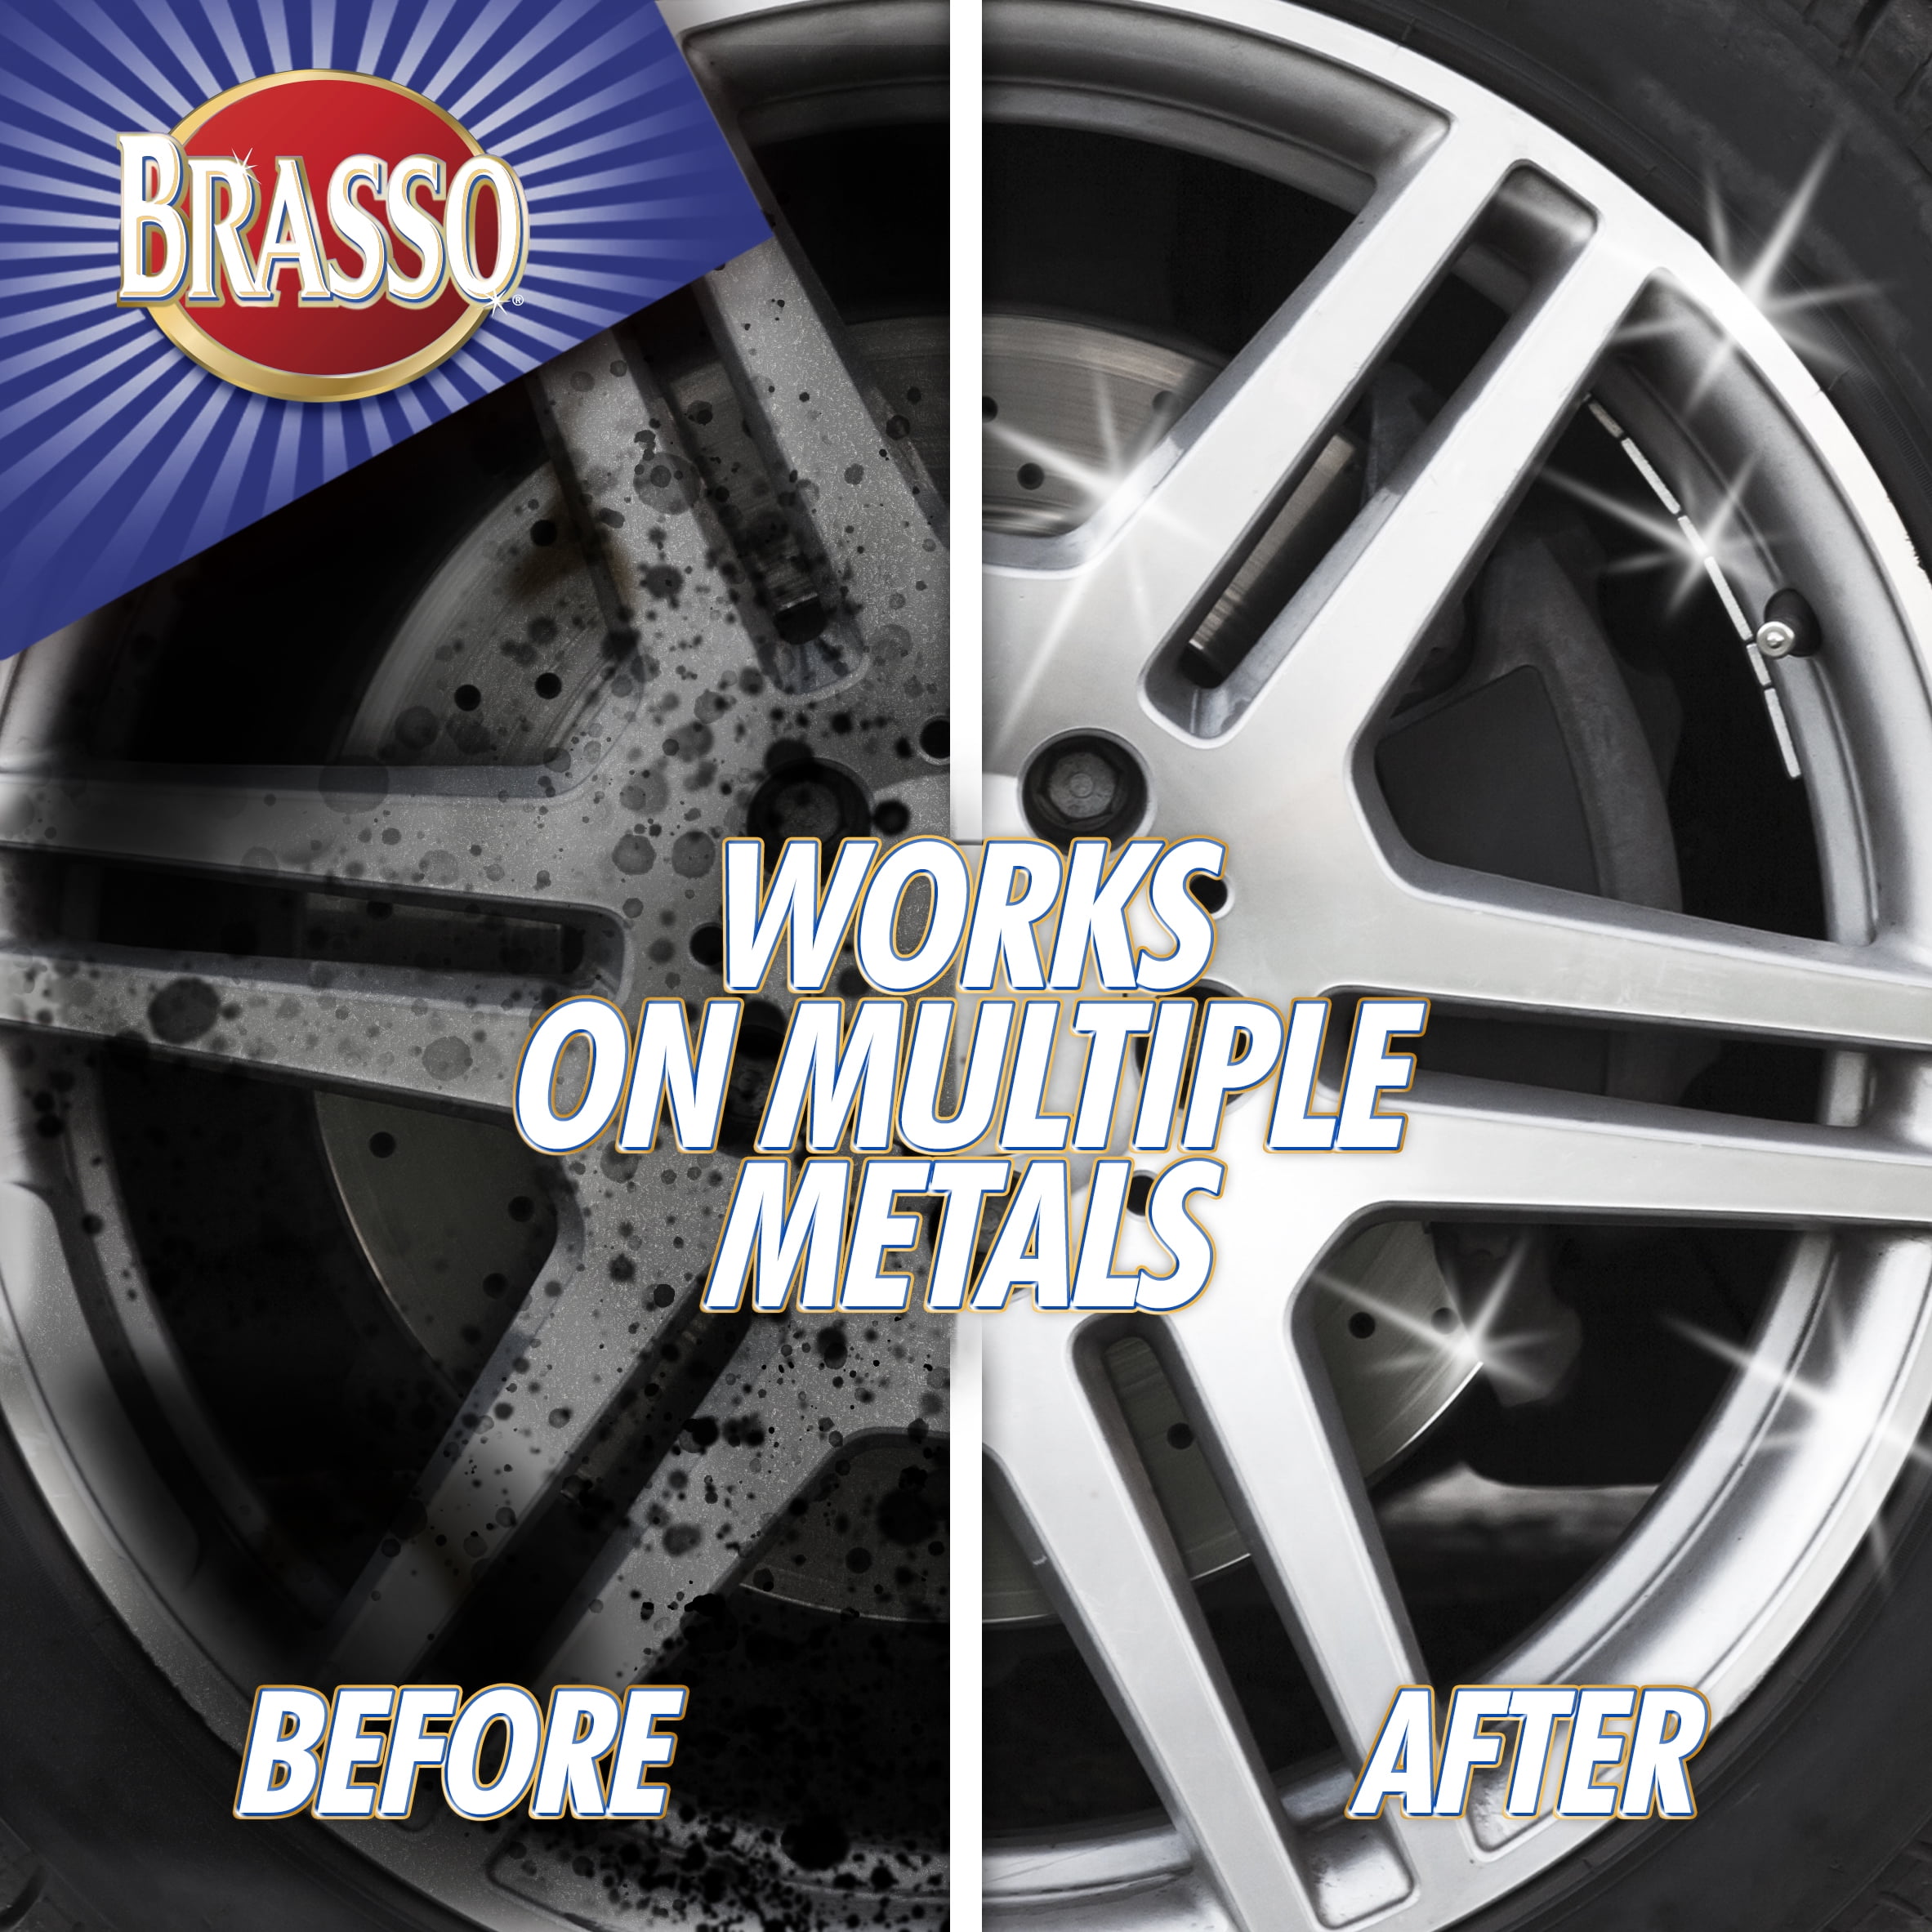 Have a question about Brasso 8 oz. Metal Polish? - Pg 1 - The Home